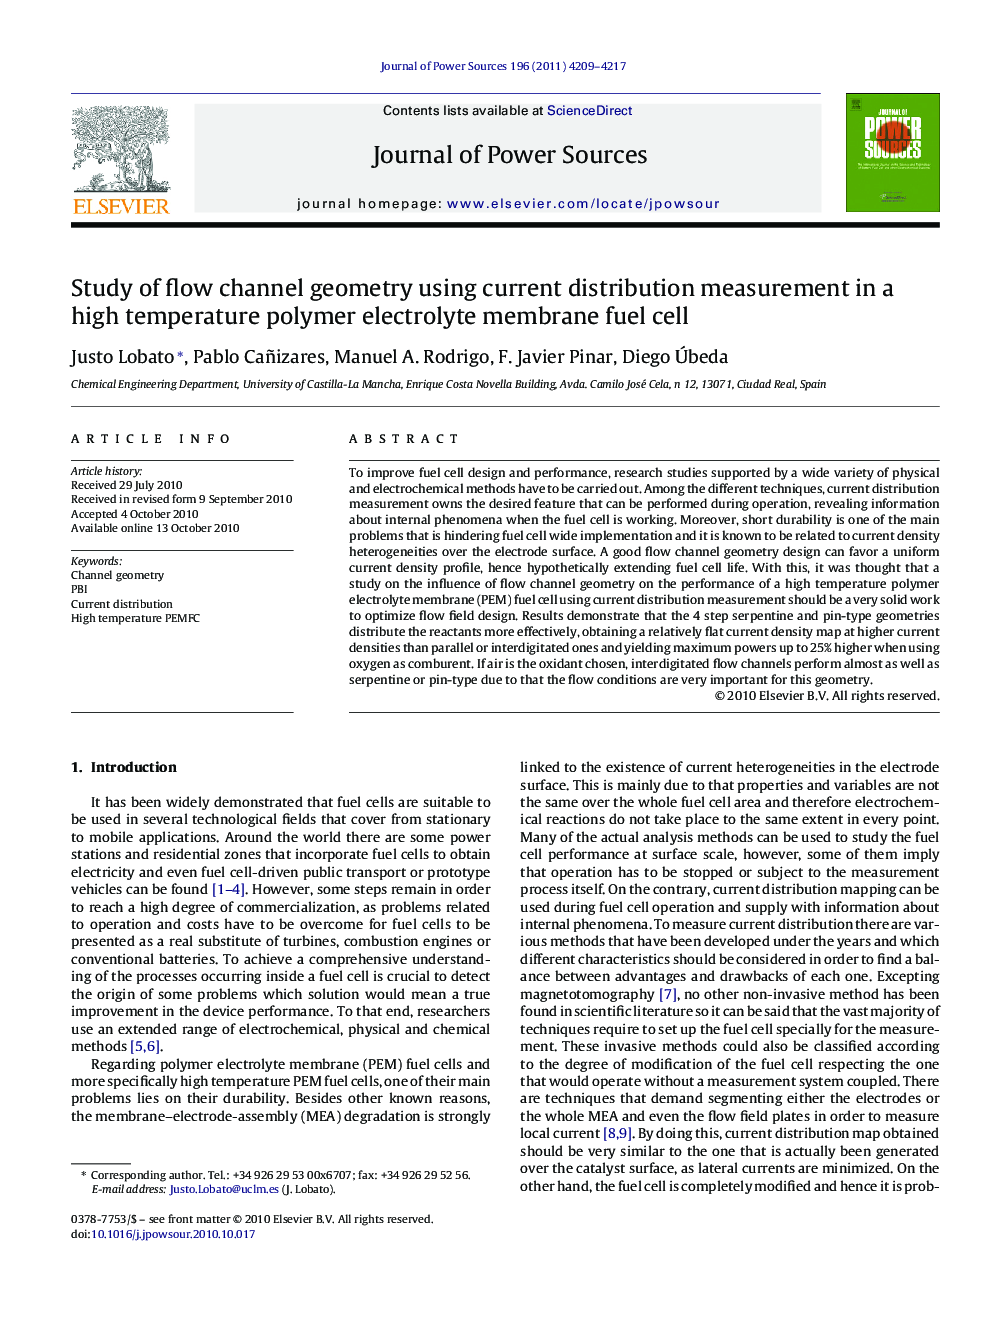 Study of flow channel geometry using current distribution measurement in a high temperature polymer electrolyte membrane fuel cell